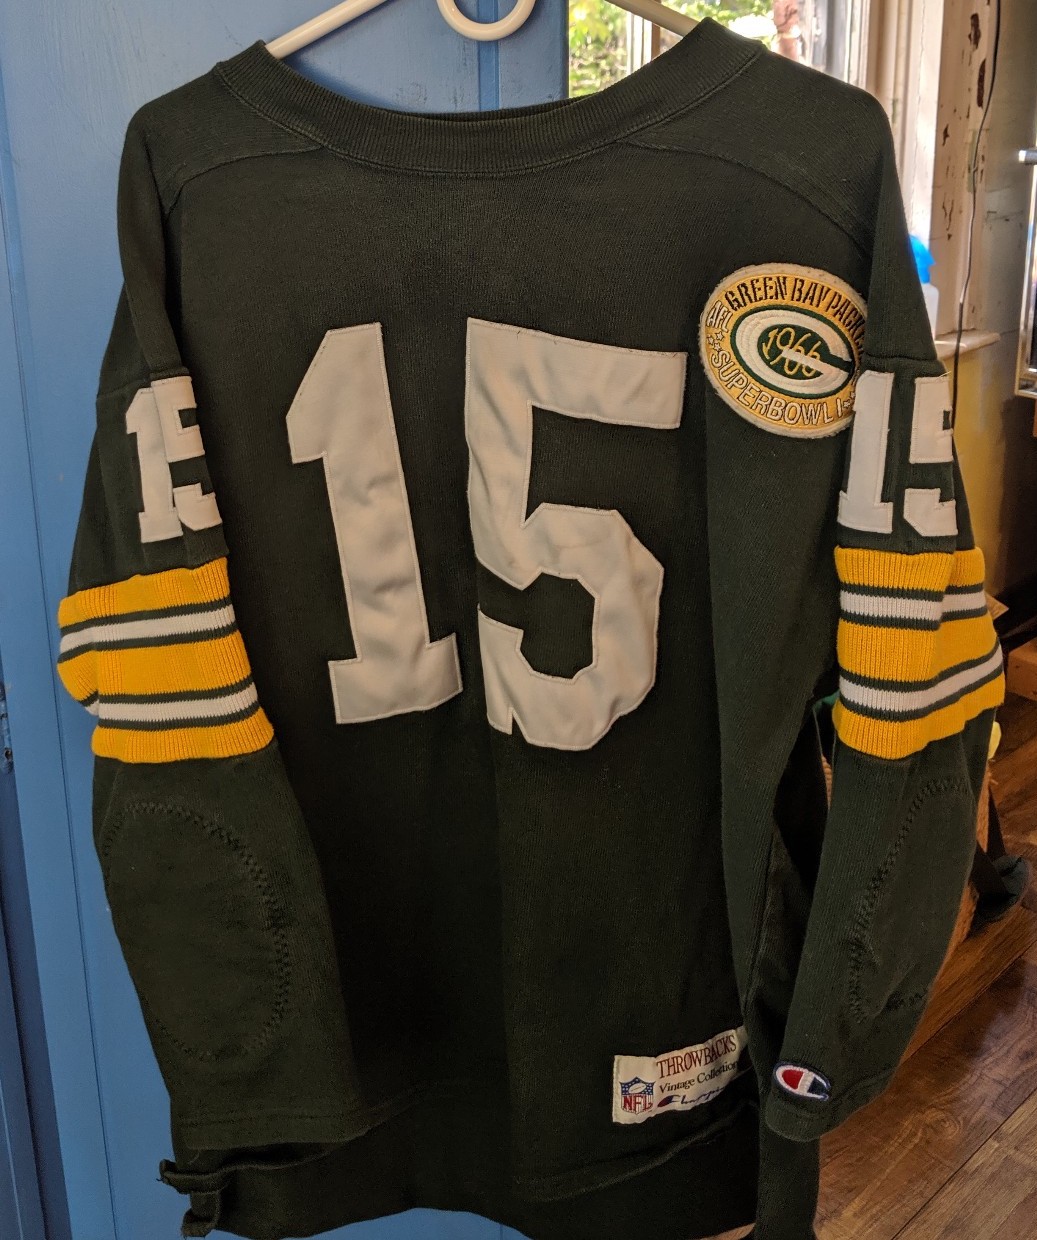 Heritage Uniforms and Jerseys and Stadiums - NFL, MLB, NHL, NBA, NCAA, US  Colleges: Telling the story of the origin of NFL Throwback jerseys - Tiedman